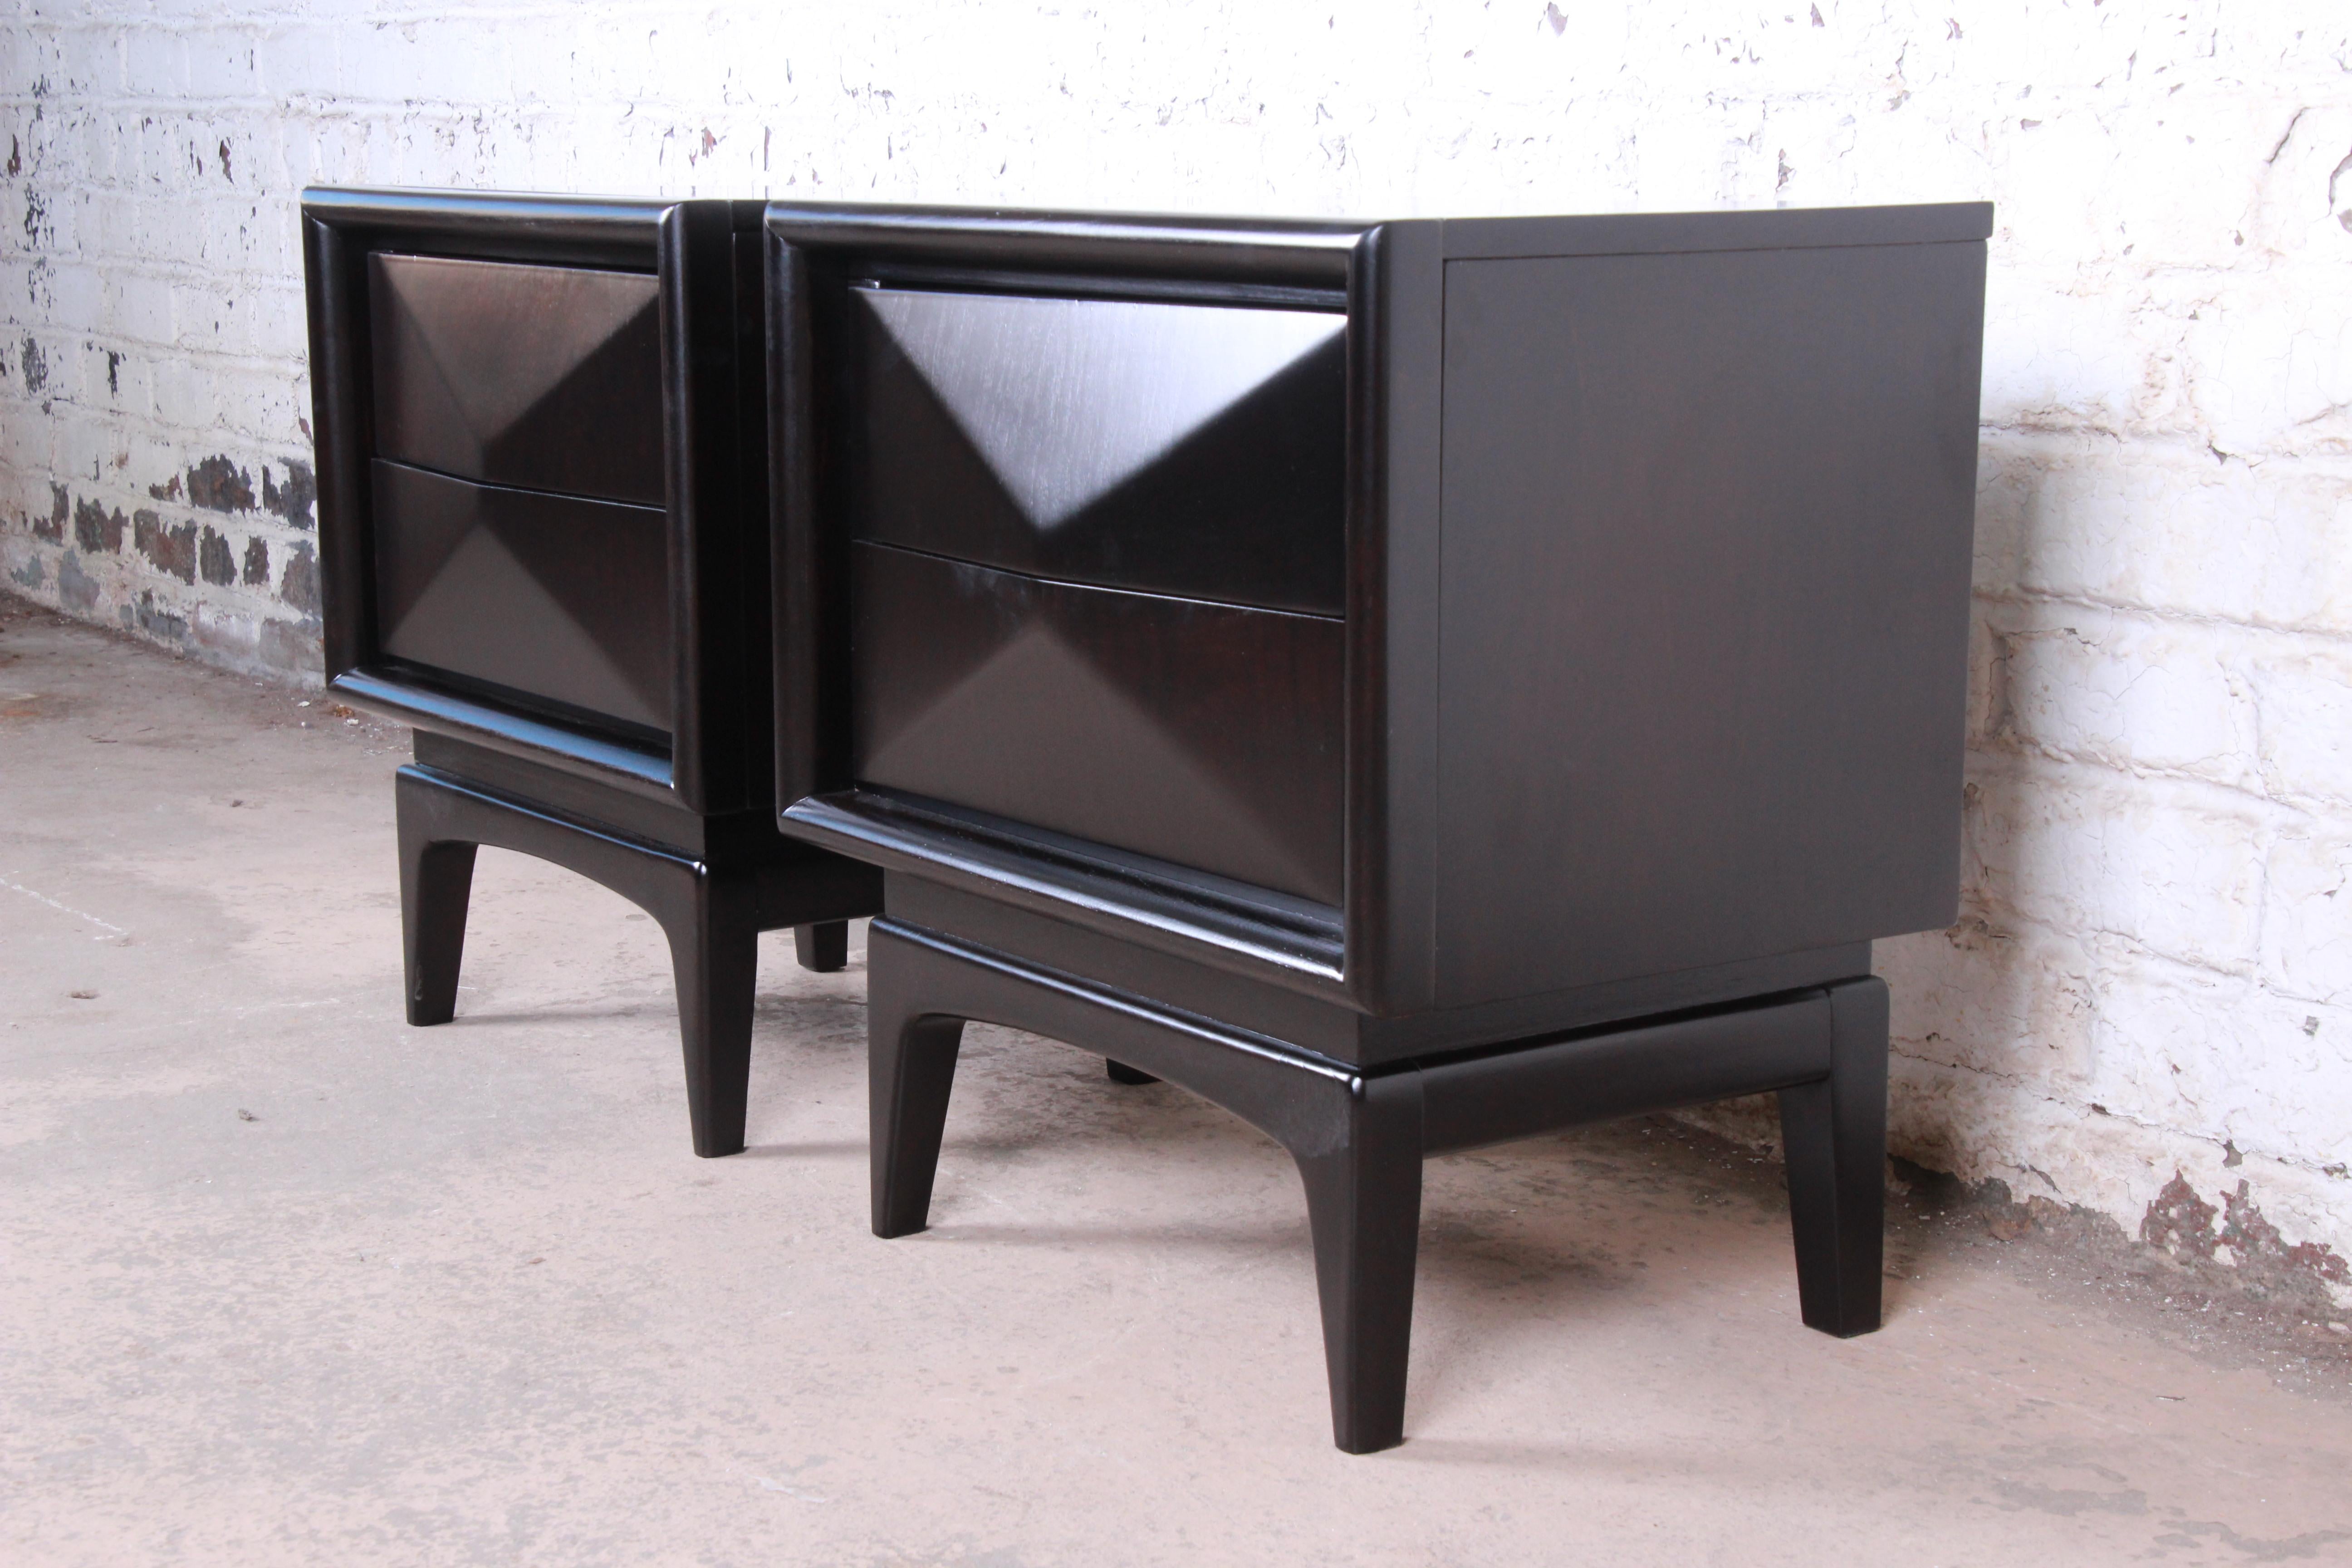 American Mid-Century Modern Ebonized Diamond Front Nightstands by United, Refinished